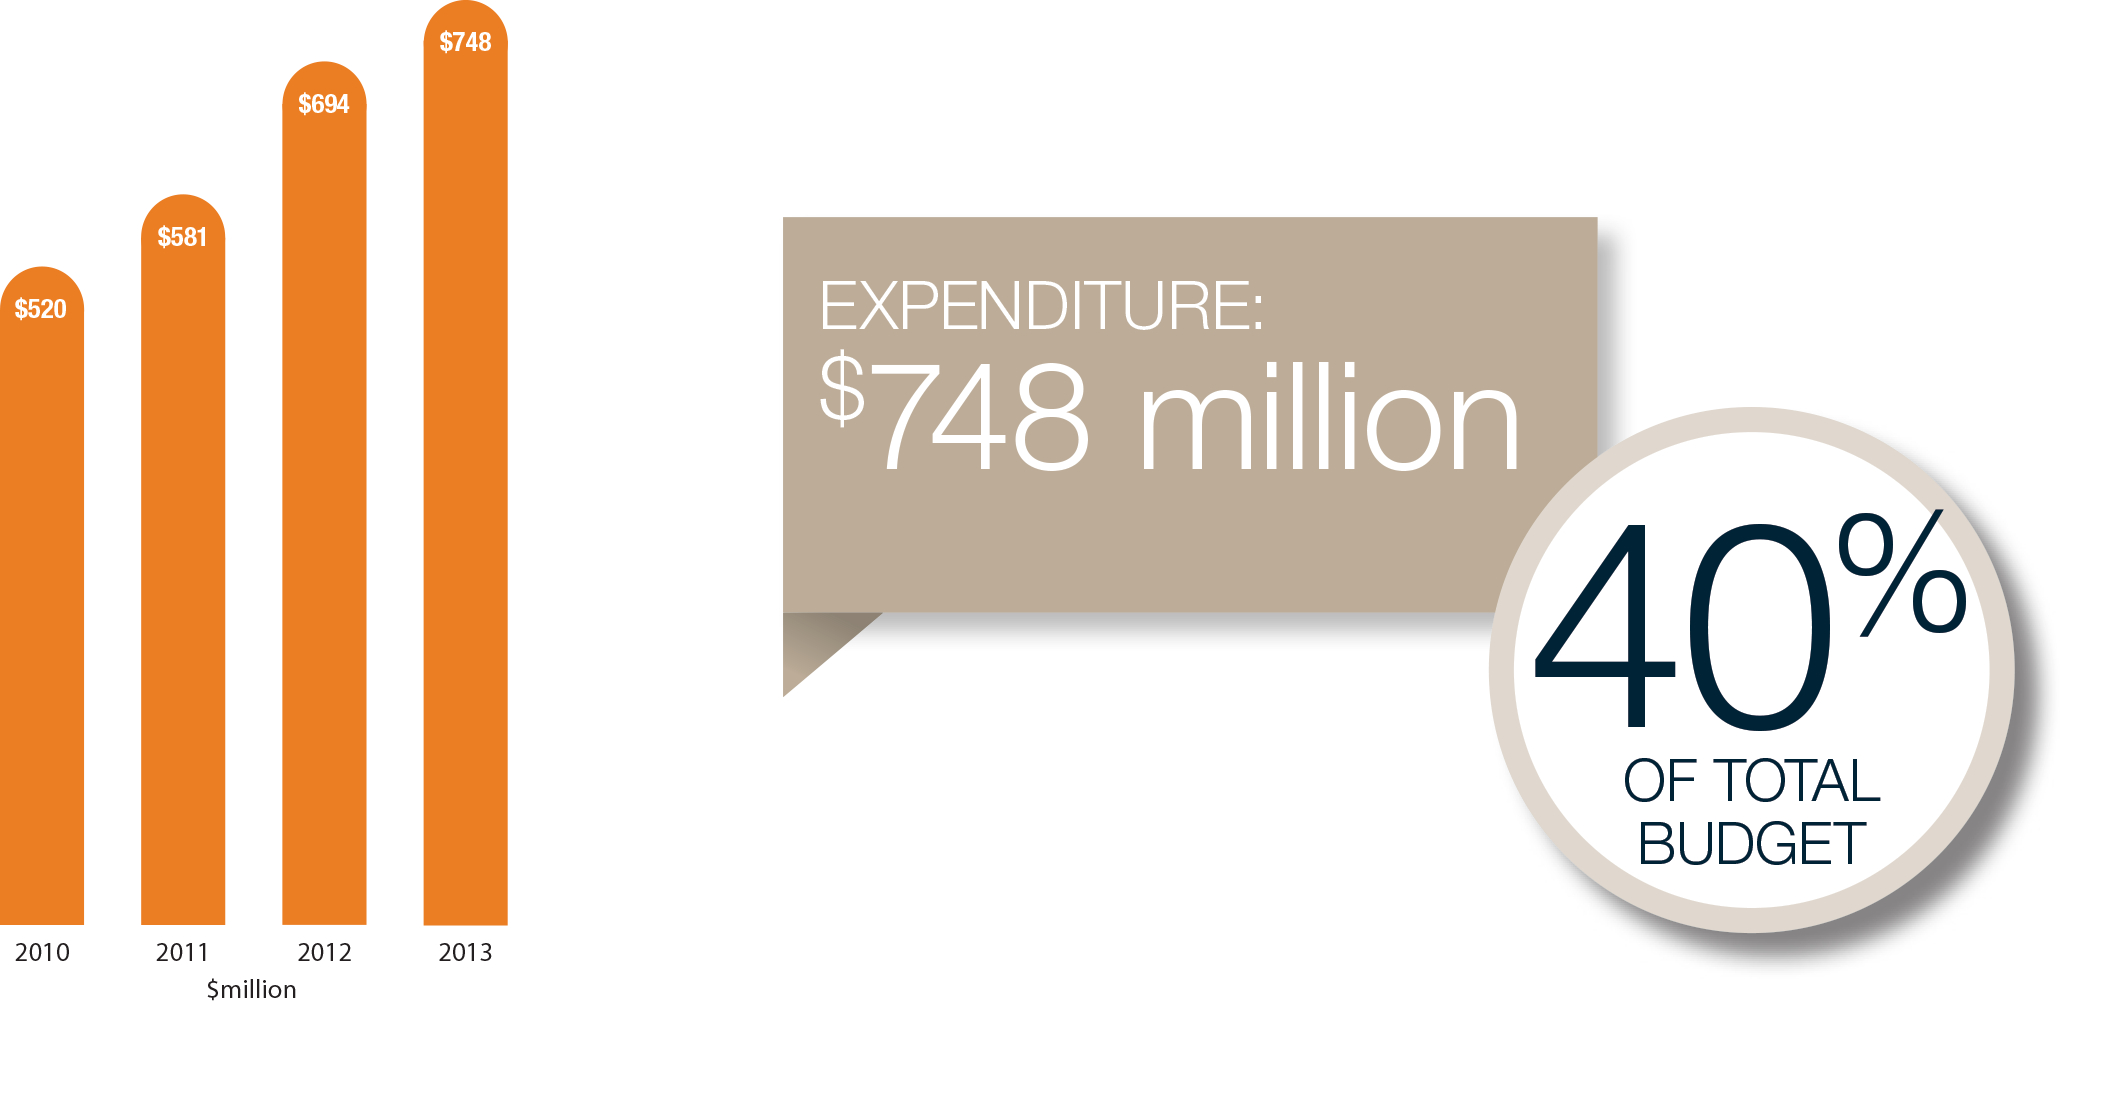 Expenditure in 2013 was $748 million or 40% of the total budget